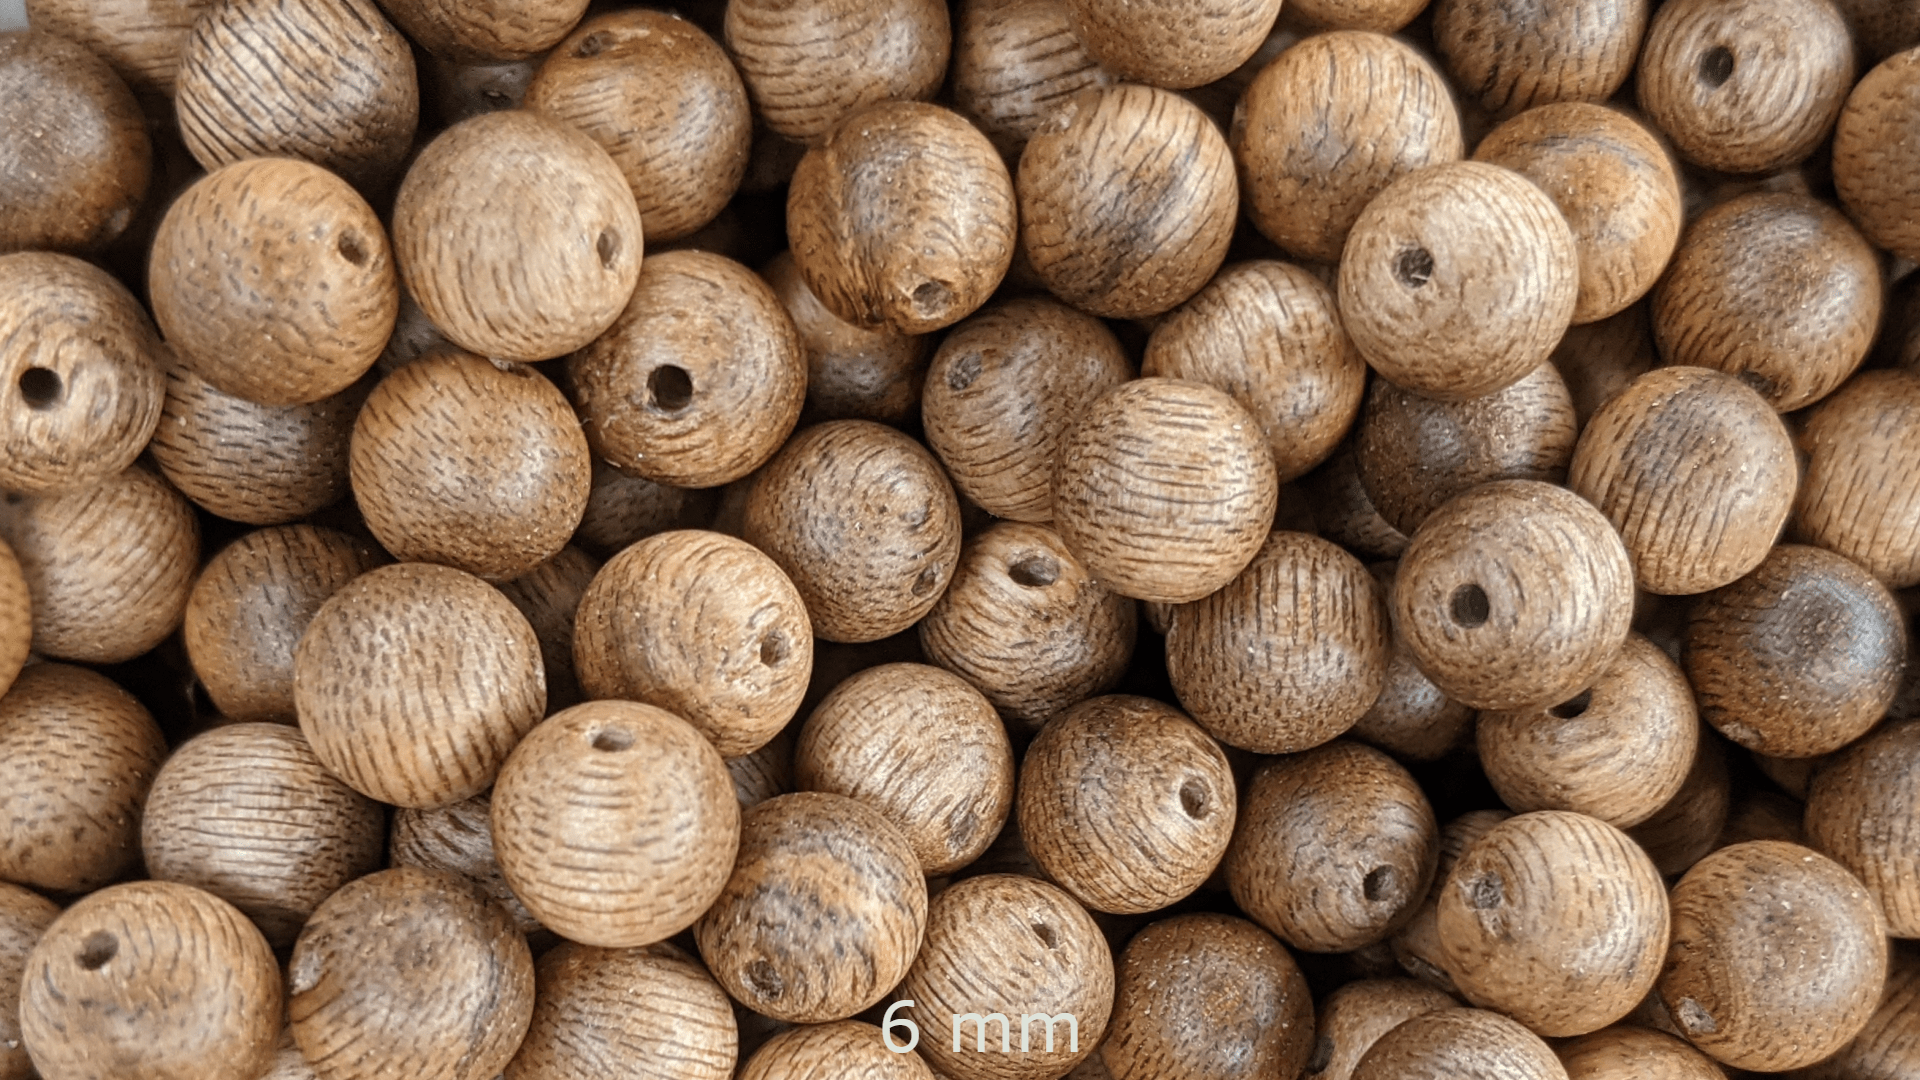 12 Premium Cultivated Agarwood Beads (mala and bracelet size) - The GGG - 12 beads of 6mm Cultivated Agarwood Beads